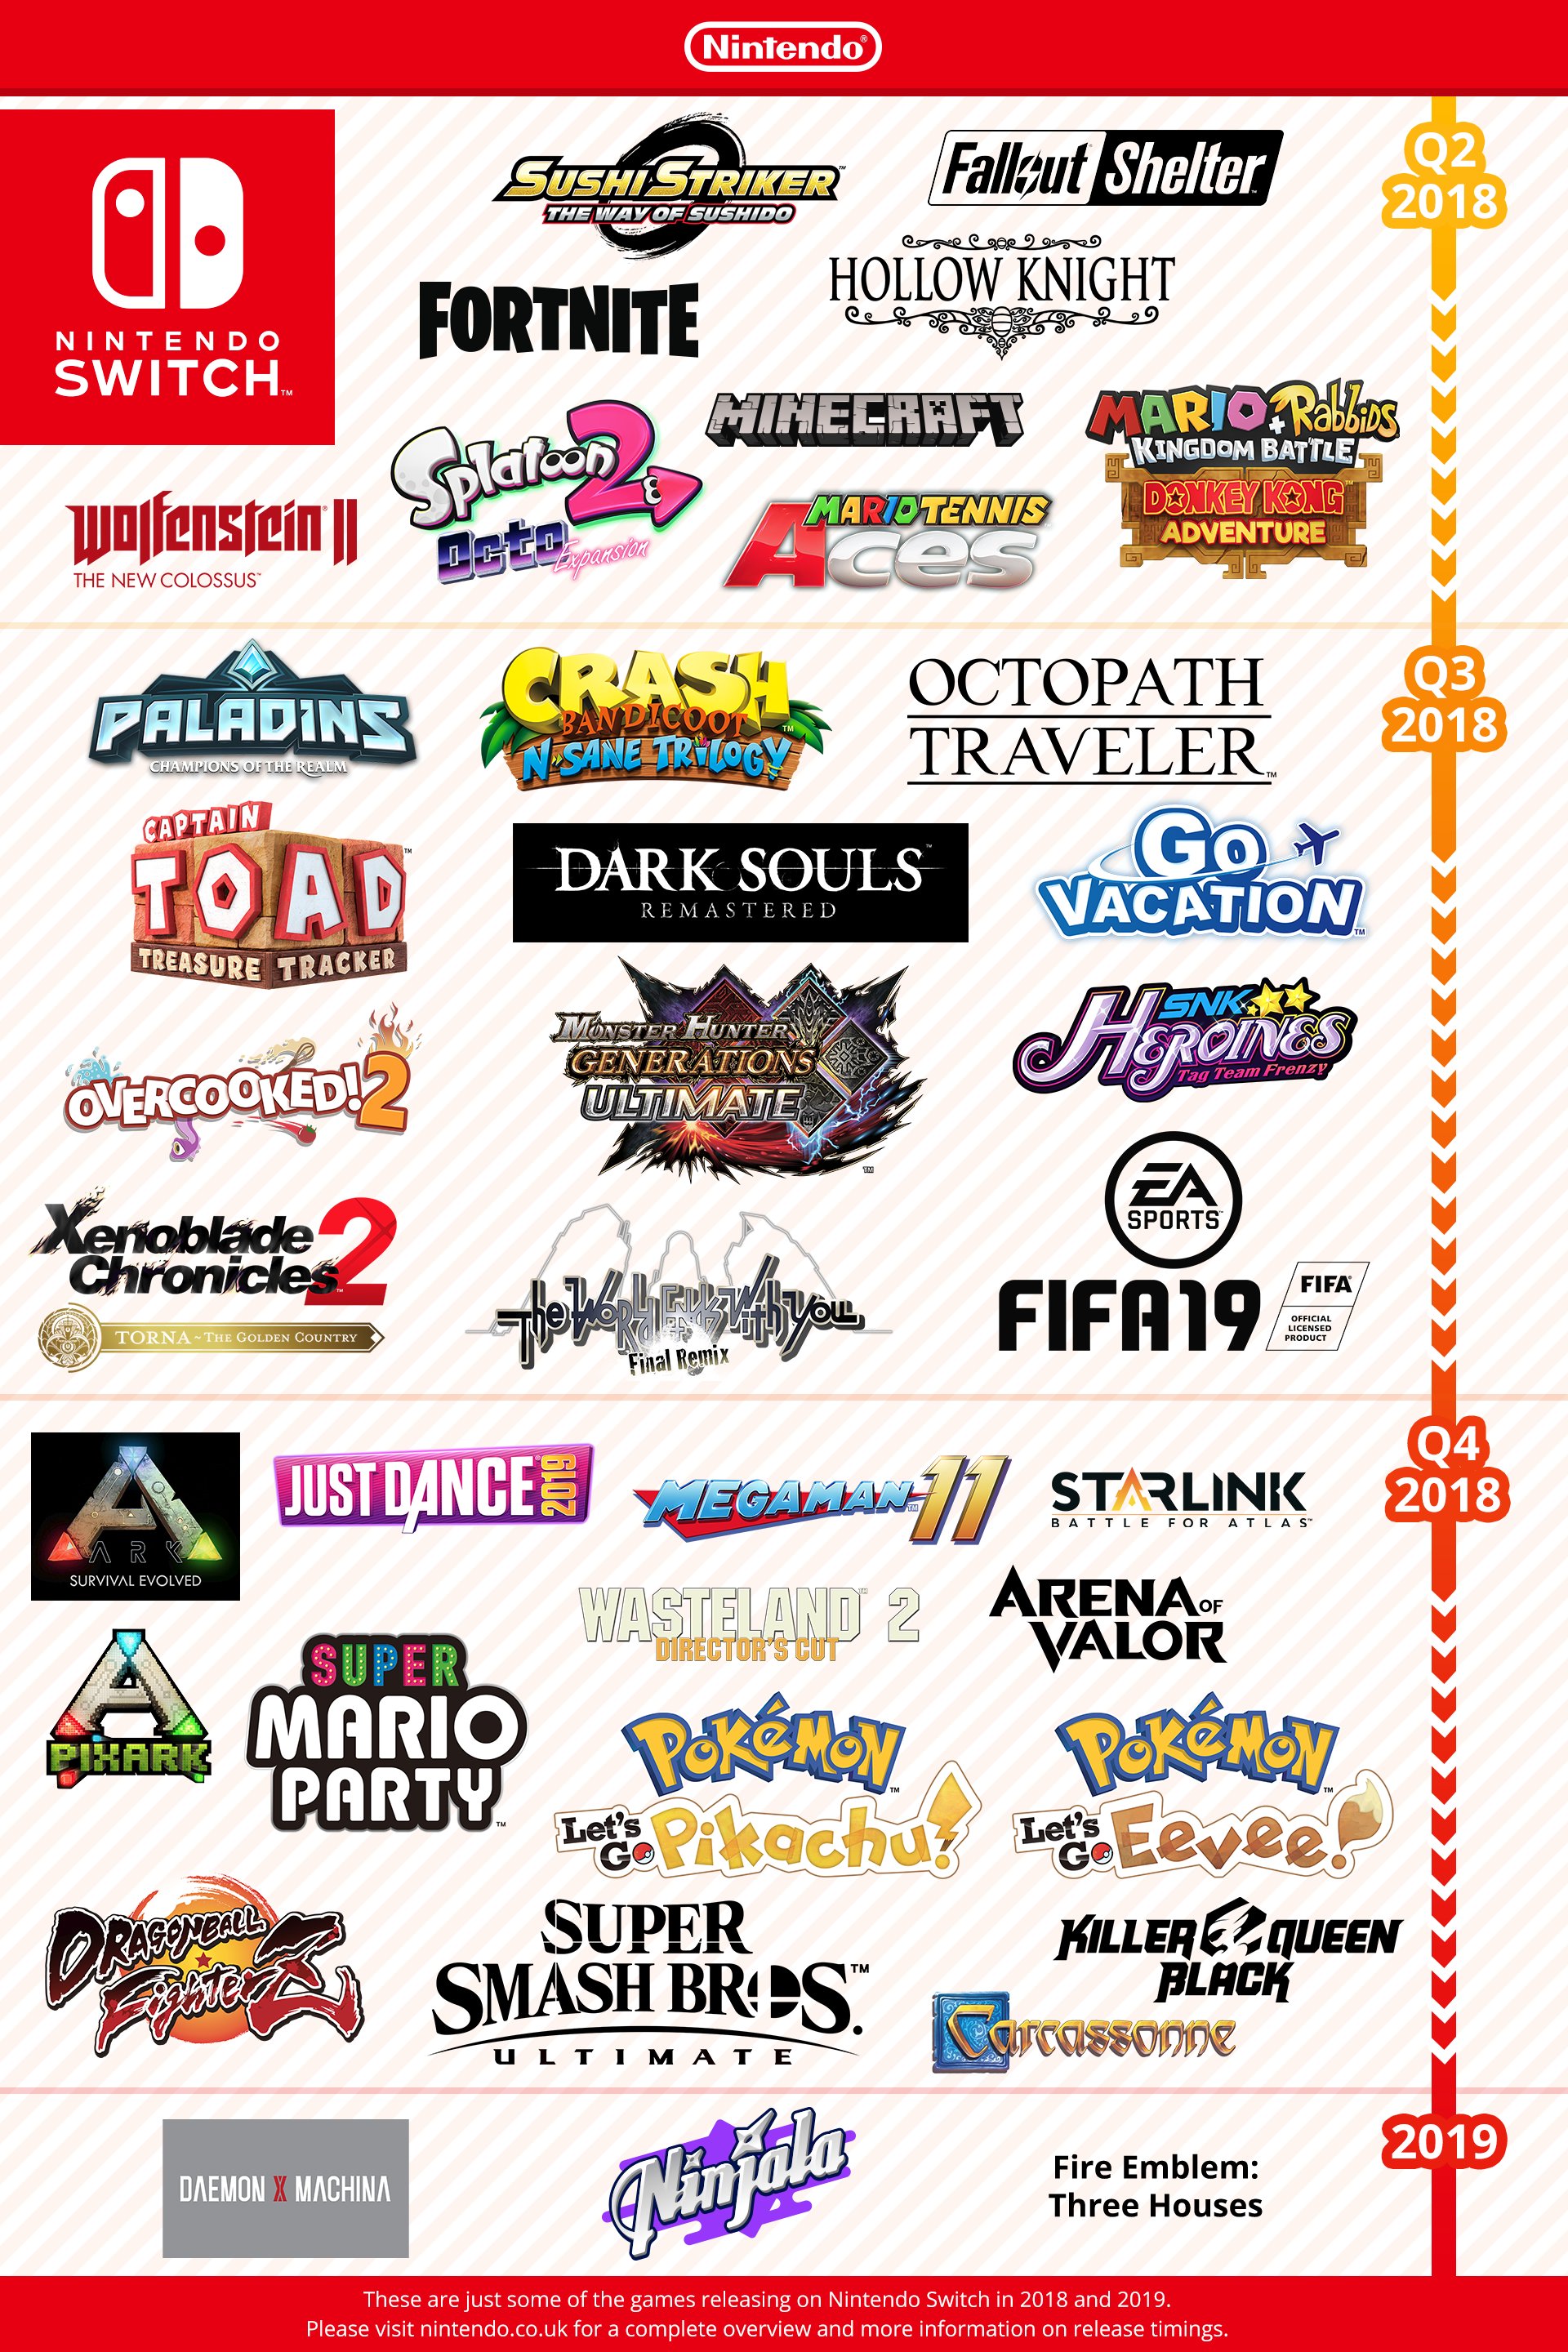 Nintendo UK on Twitter: "Here are just some of the titles on the way to  #NintendoSwitch through the end of the year! #NintendoE3 See a complete  overview of upcoming titles and release